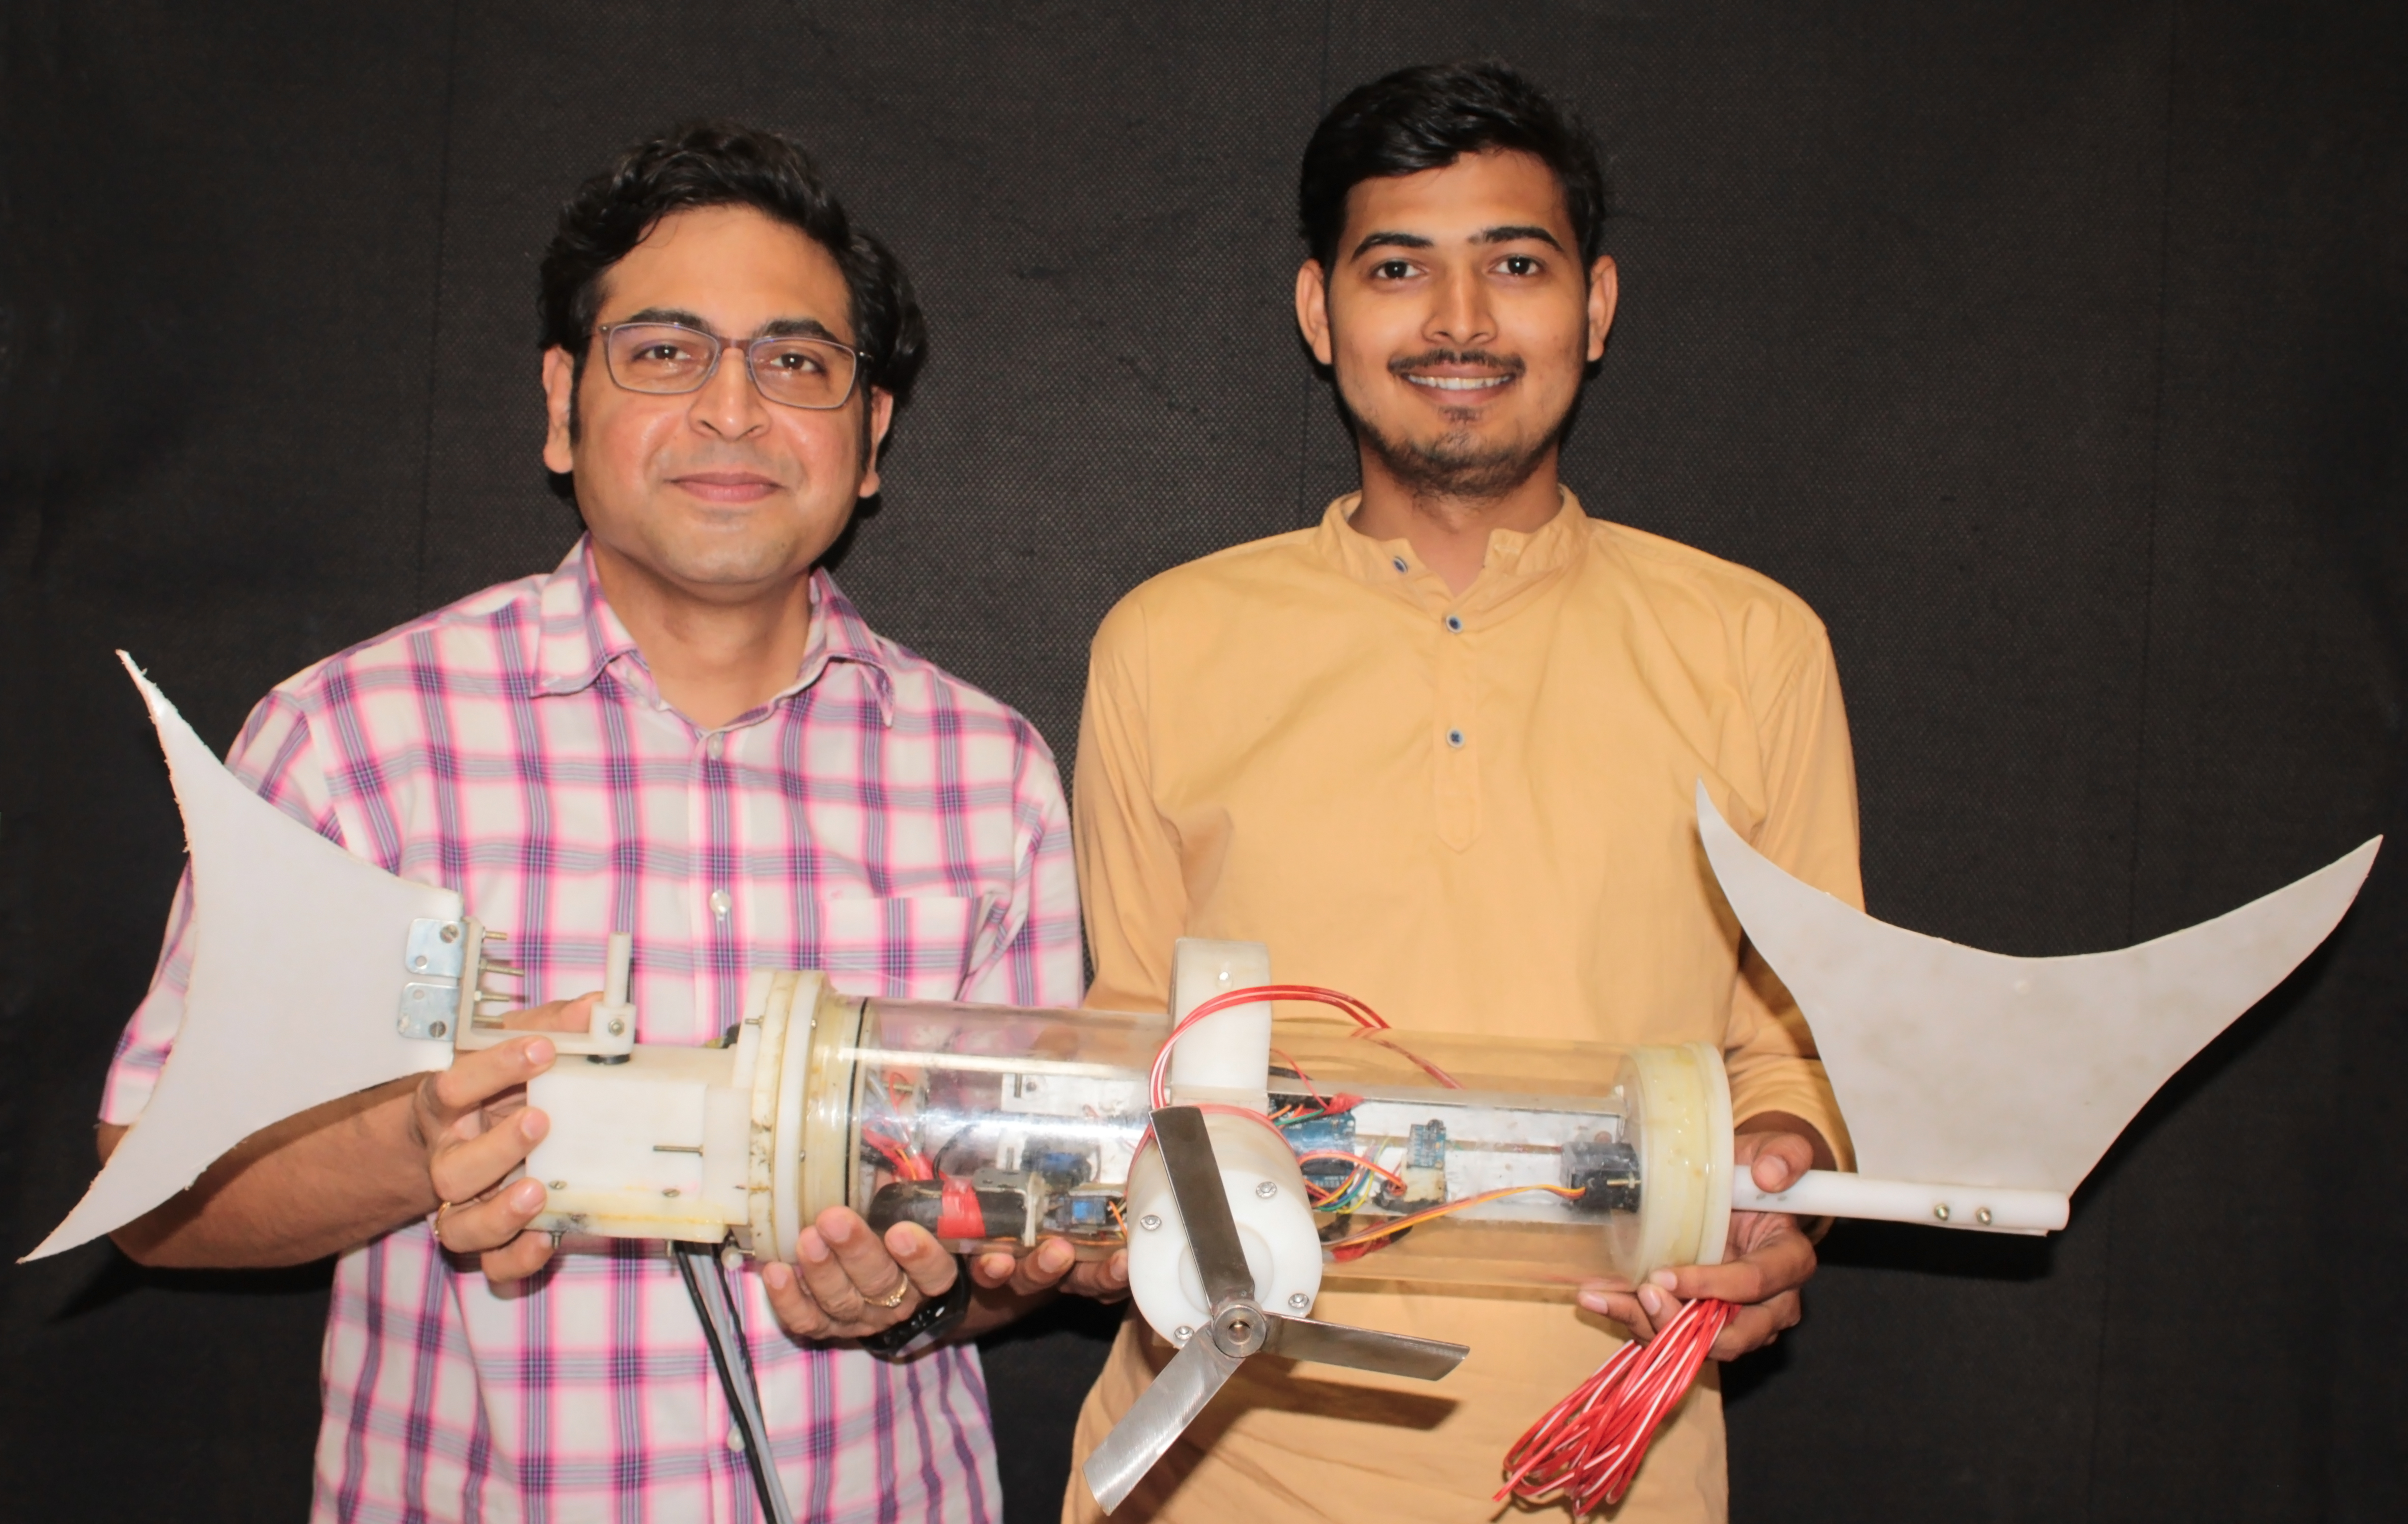 Divanshu, the IIT Madras Student and Professor Prabhu Rajagopal who are working on this project currently. (Source: Divanshu Kumar)